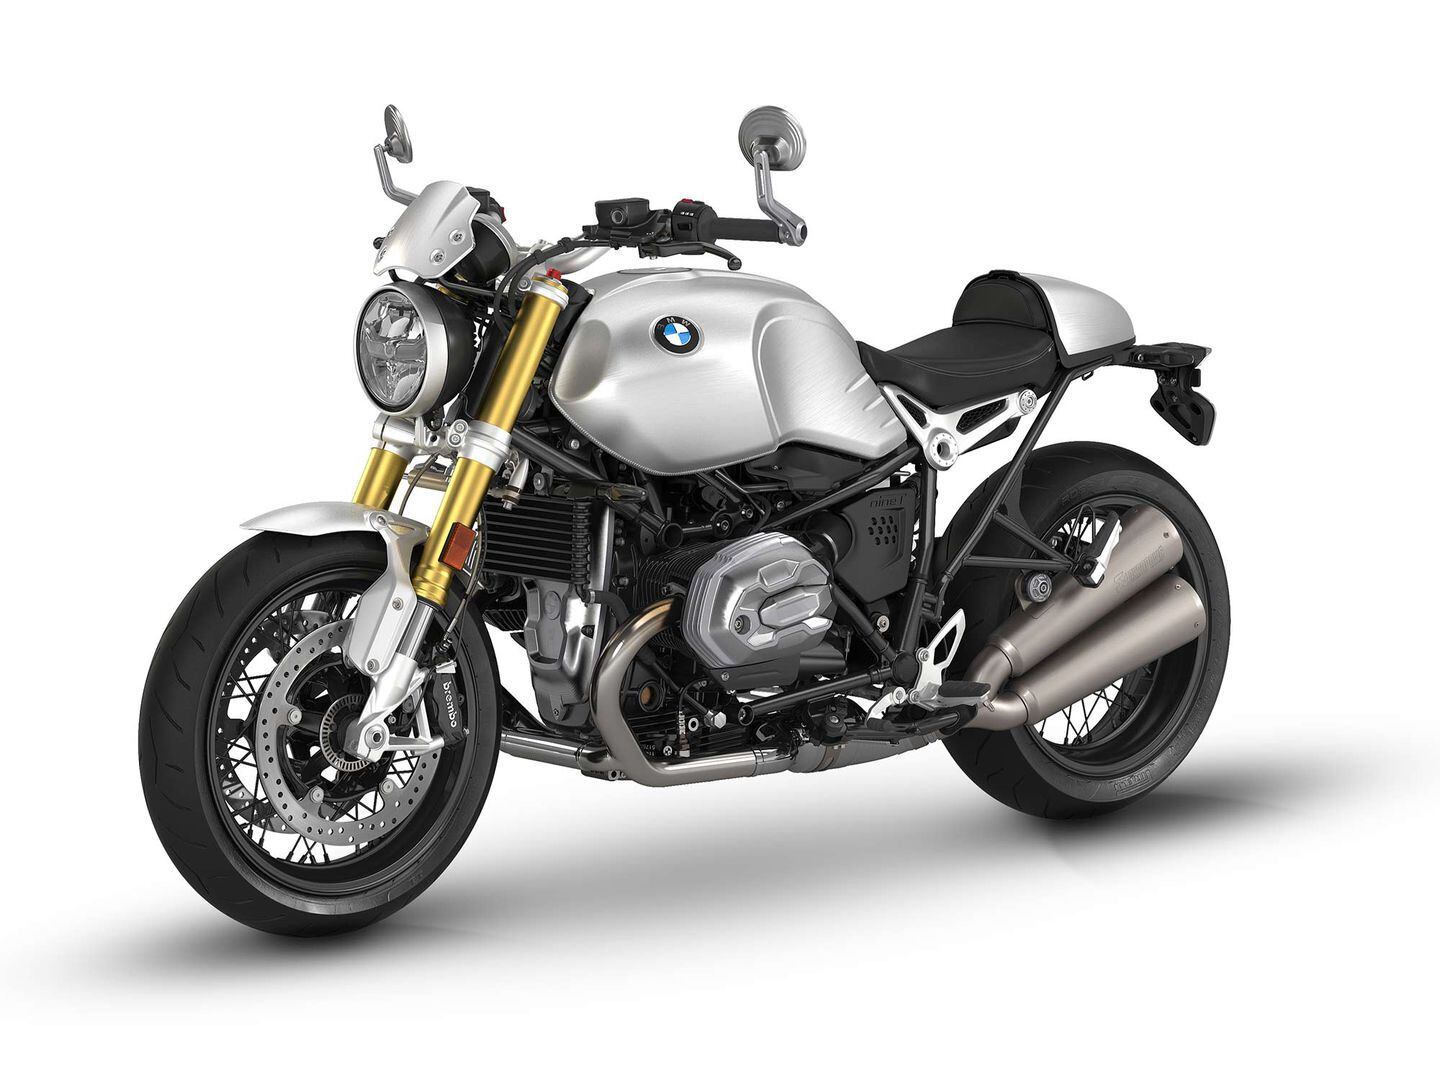 The base R nineT reduces its price for 2023 and adds several new features as standard, but is otherwise unchanged. Option 719 Aluminum Matte shown.